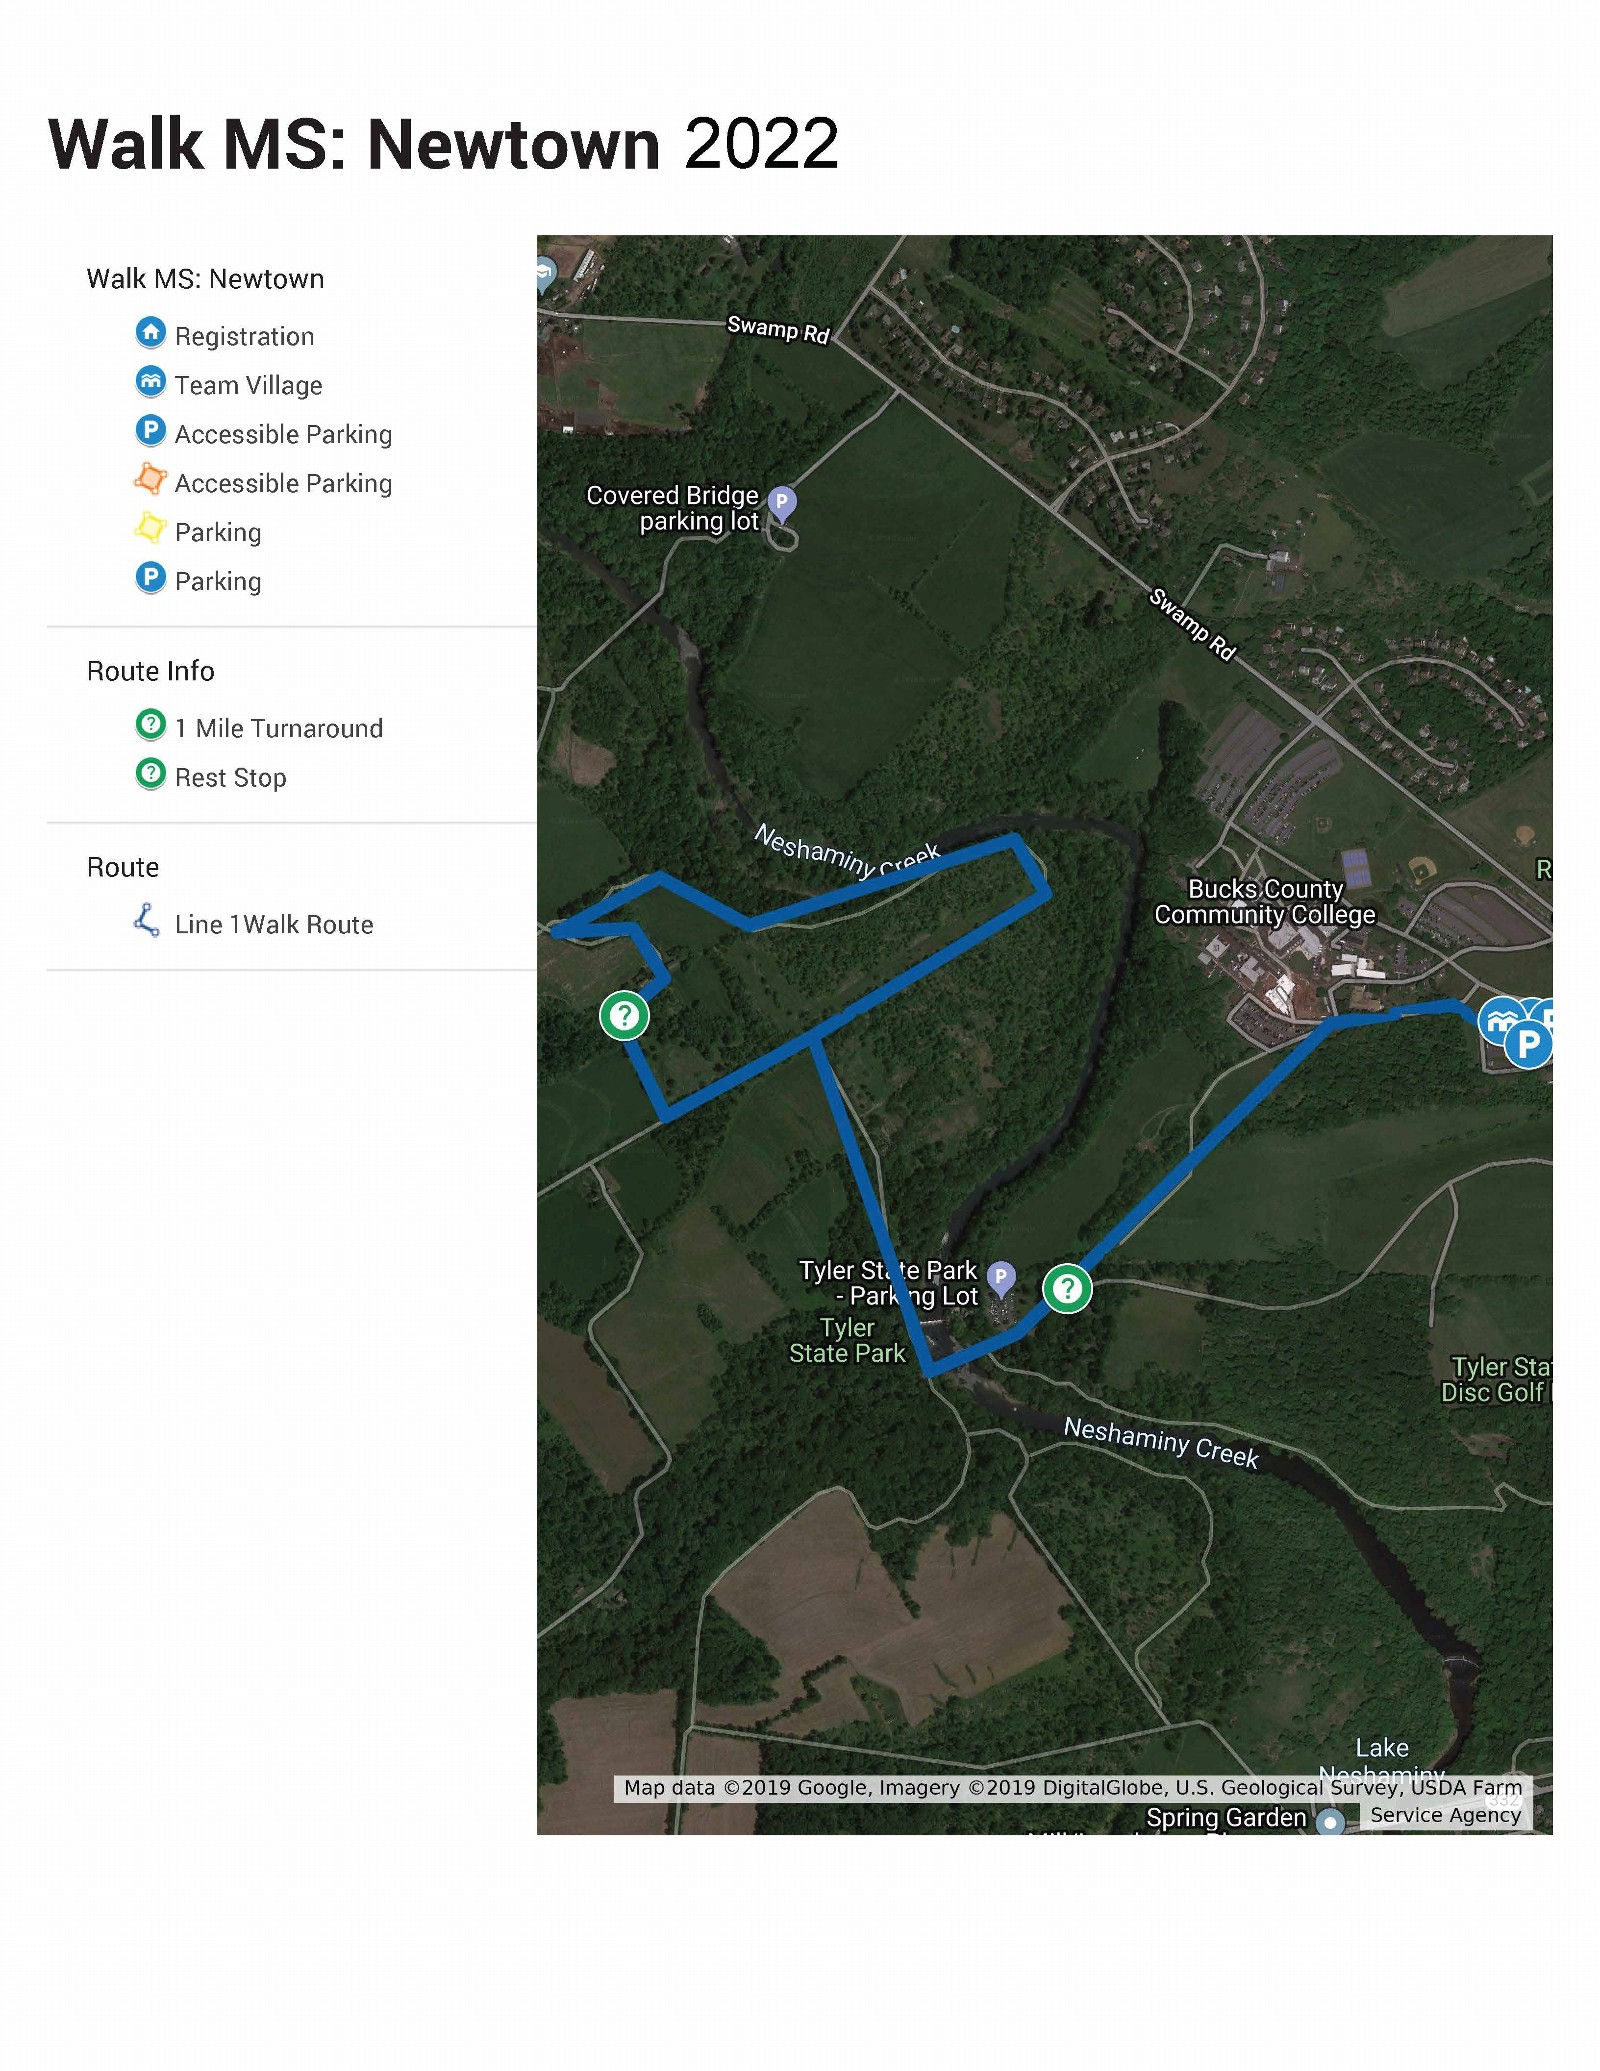 Walk MS: Newtown Route Map image